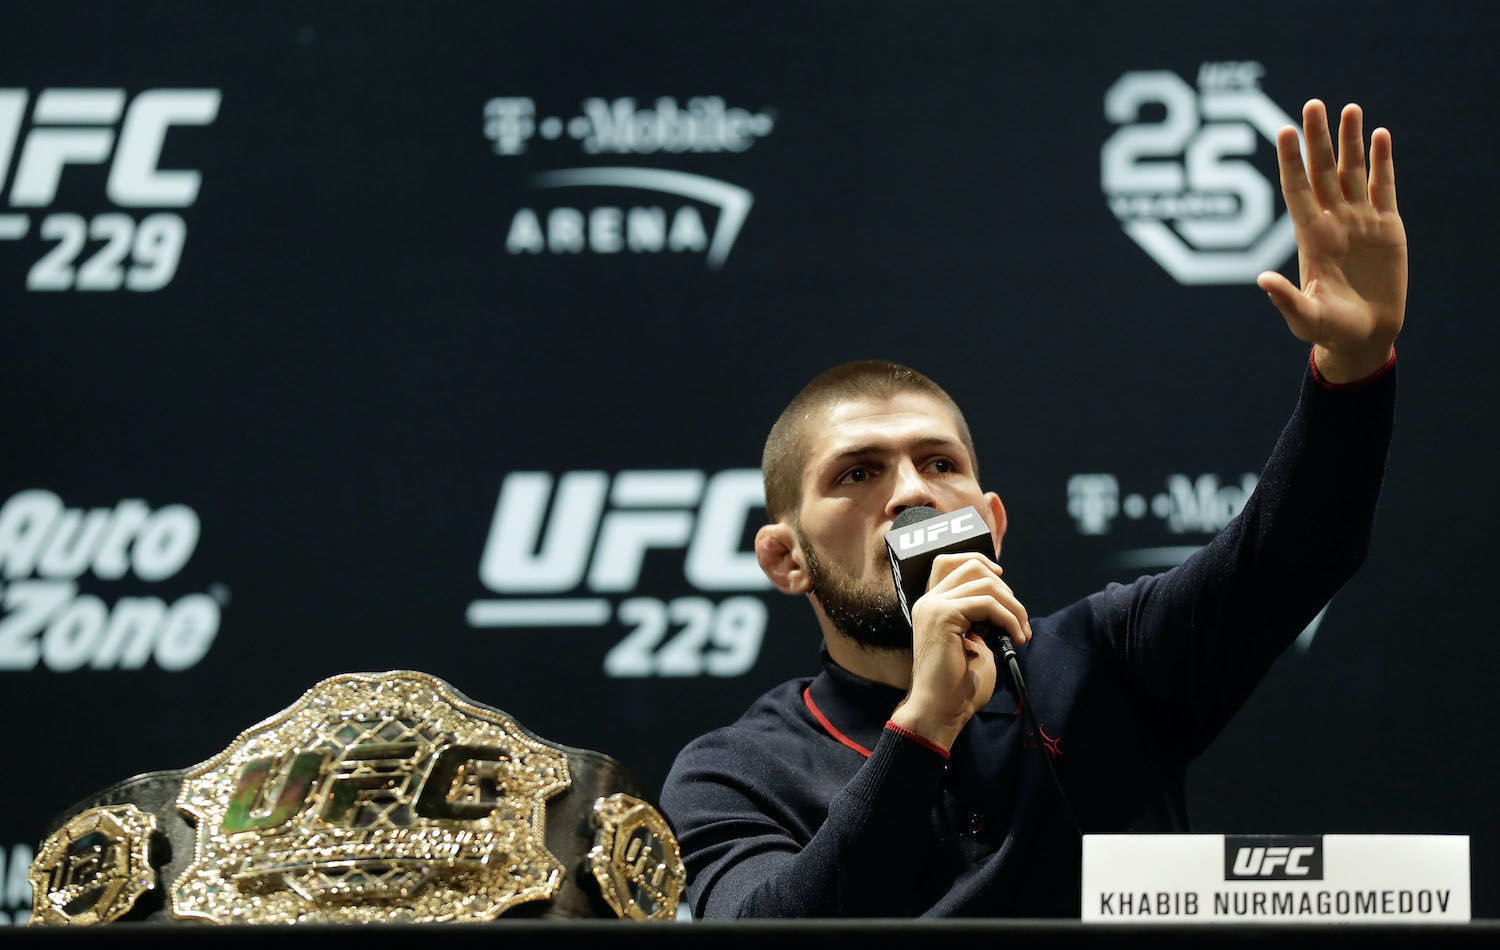 Khabib speaks during a press conference for UFC 229 at Park Theater at Park MGM on October 03, 2018 in Las Vegas, Nevada. McGregor will challenge UFC lightweight champion Khabib Nurmagomedov for his title at UFC 229 on October 6 at T-Mobile Arena in Las Vegas.